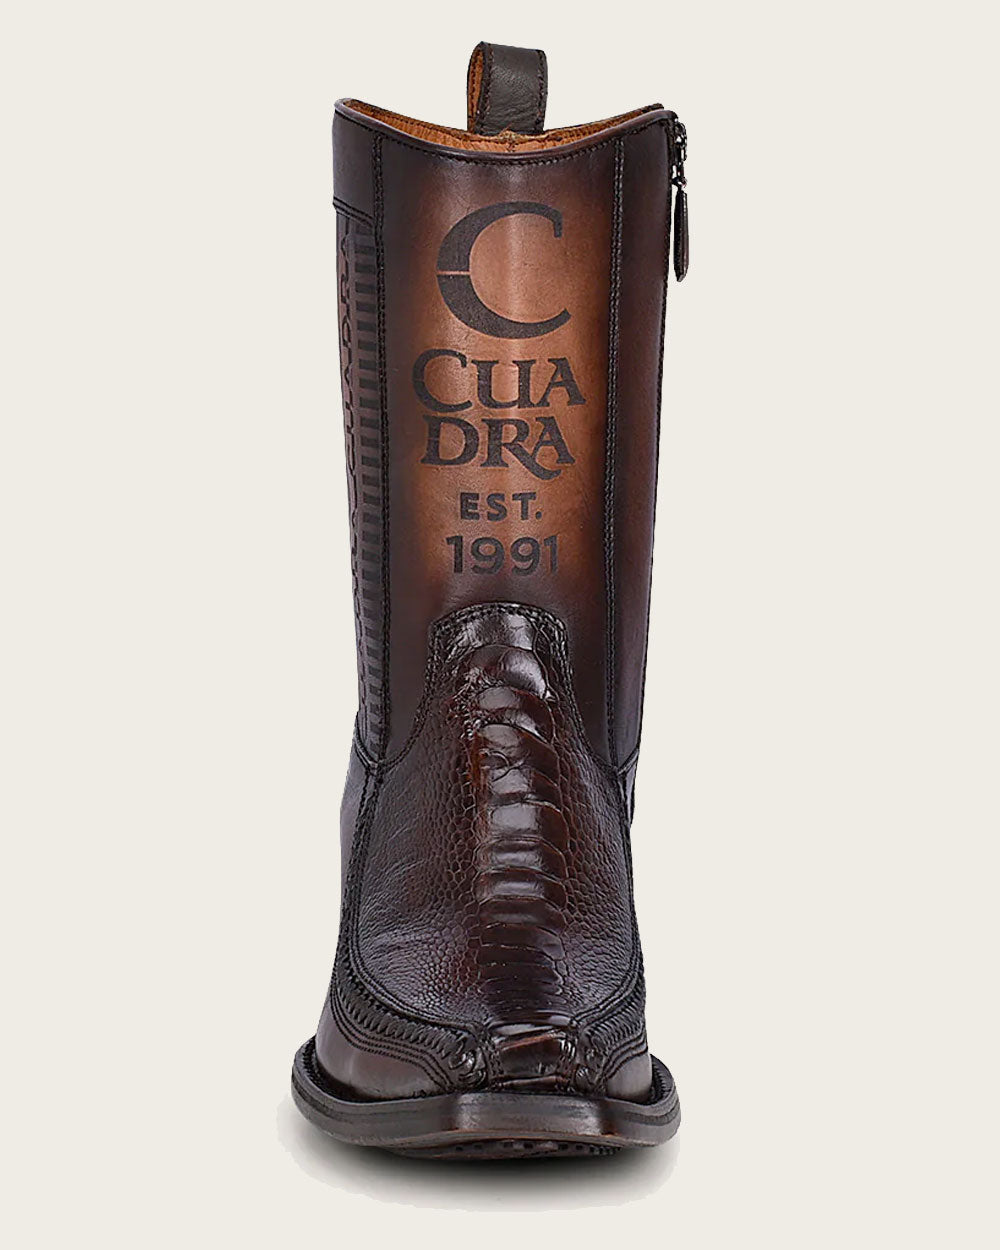 US Size Chart Available: Ensure perfect fit for your Cuadra traditional boots. 